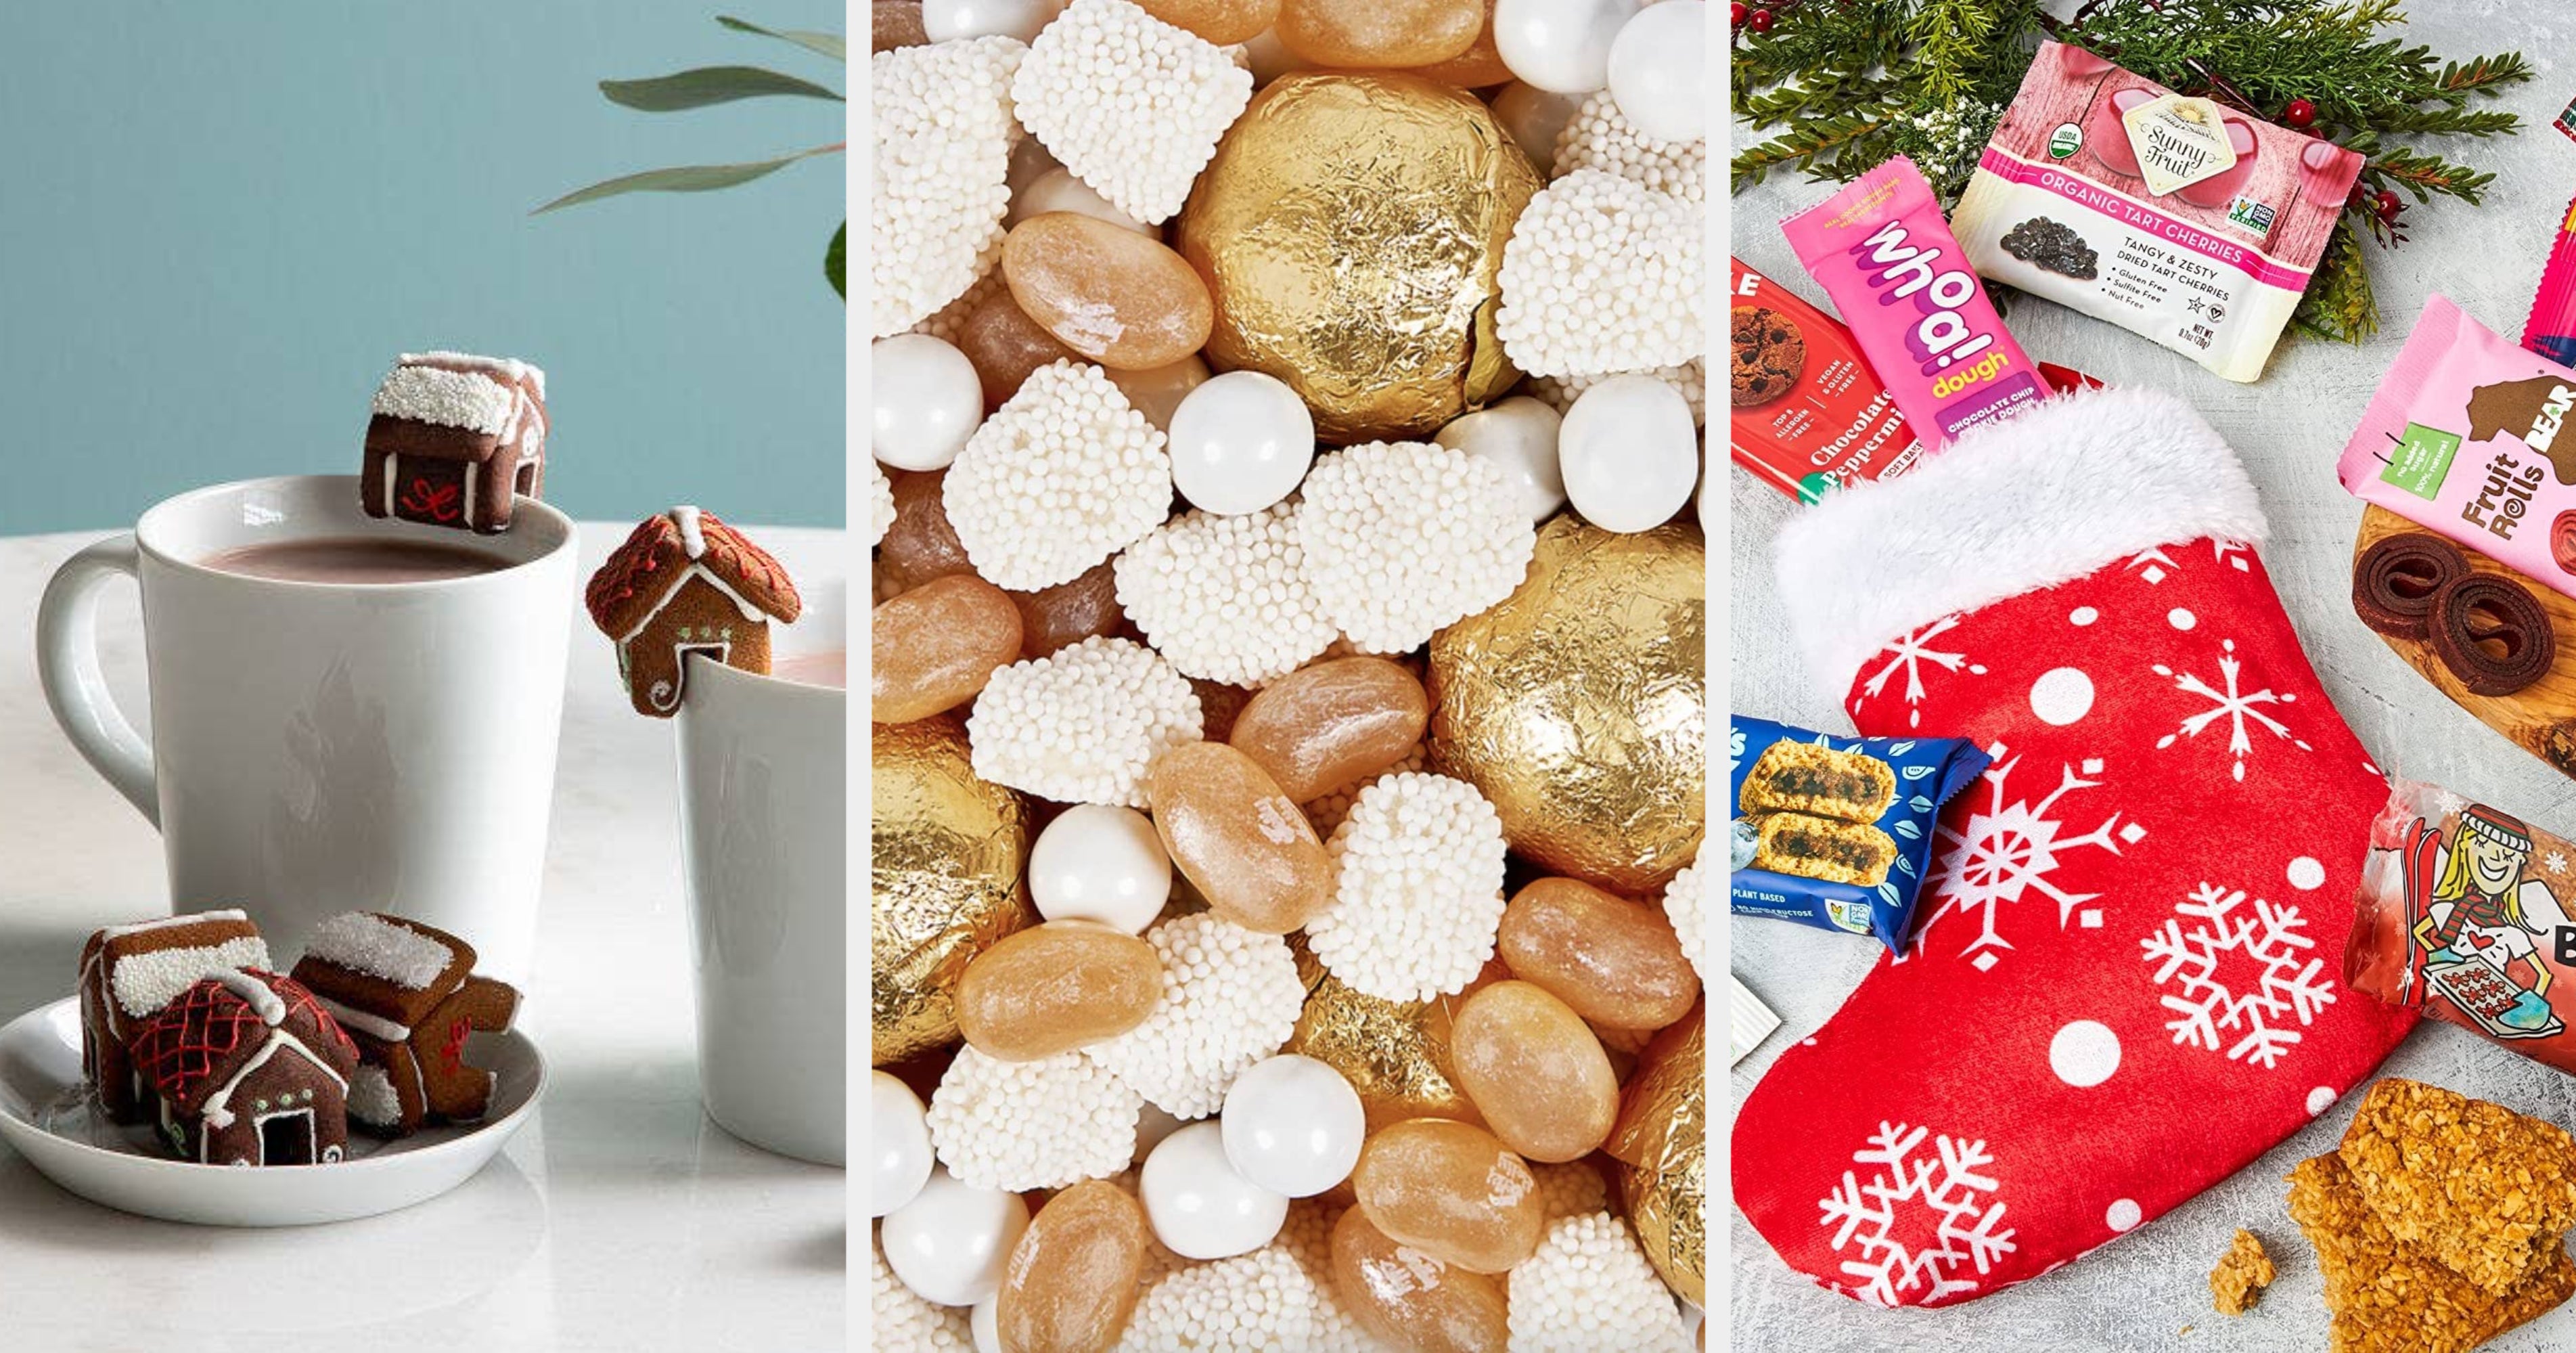 10 Awesome Stocking Stuffers Under $5 - Edible® Blog